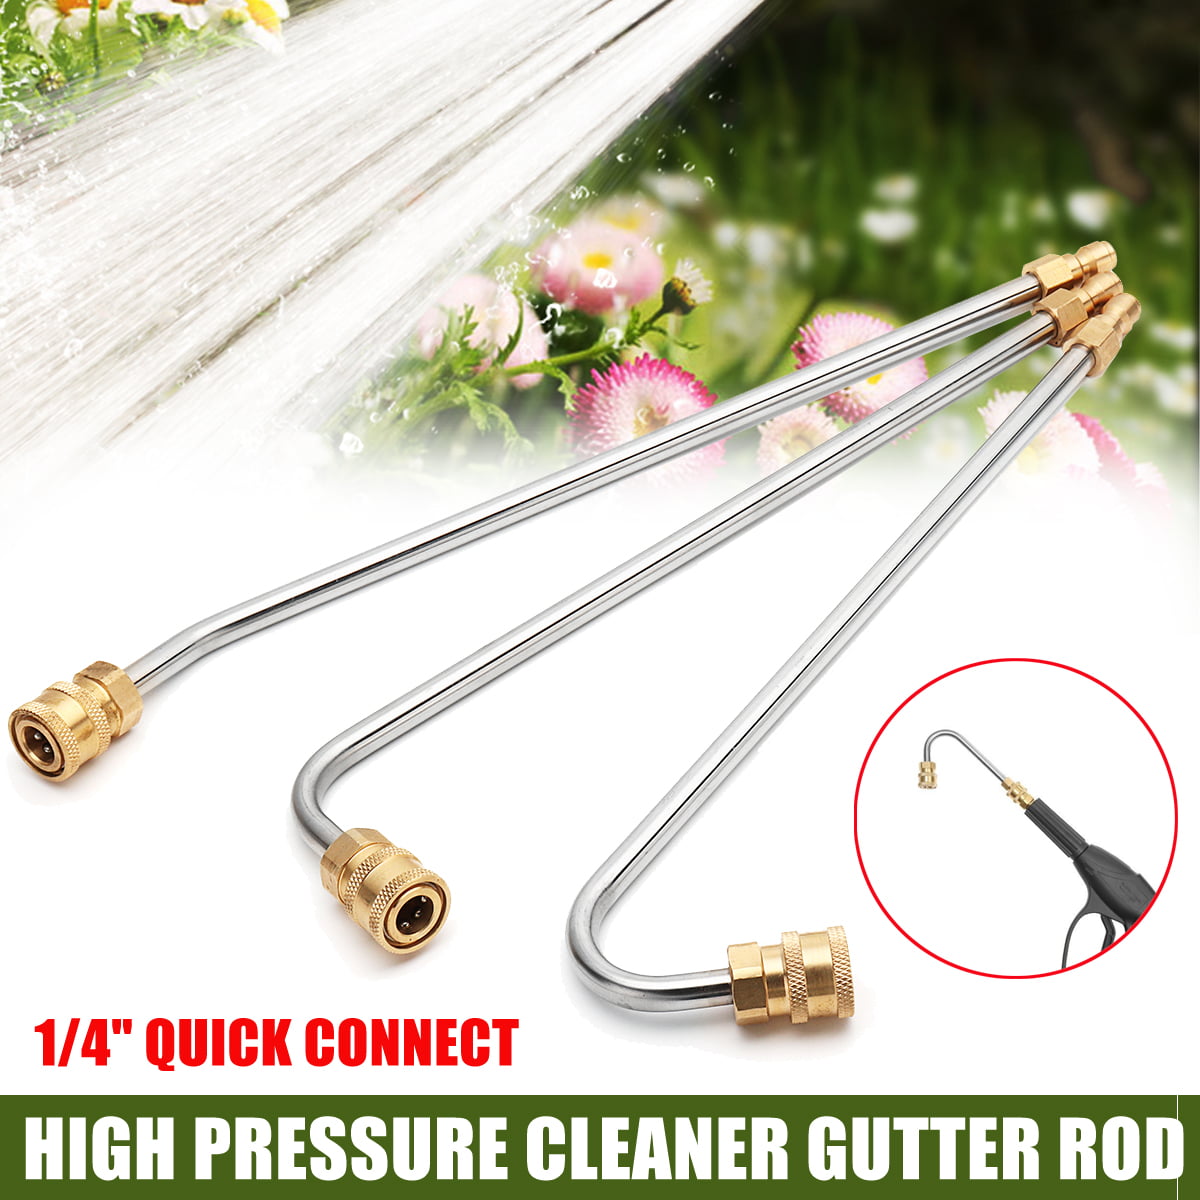 High Pressure Power Washer Cleaner Wand/Lance 1/4" Quick Connect & Nozzle Kit 